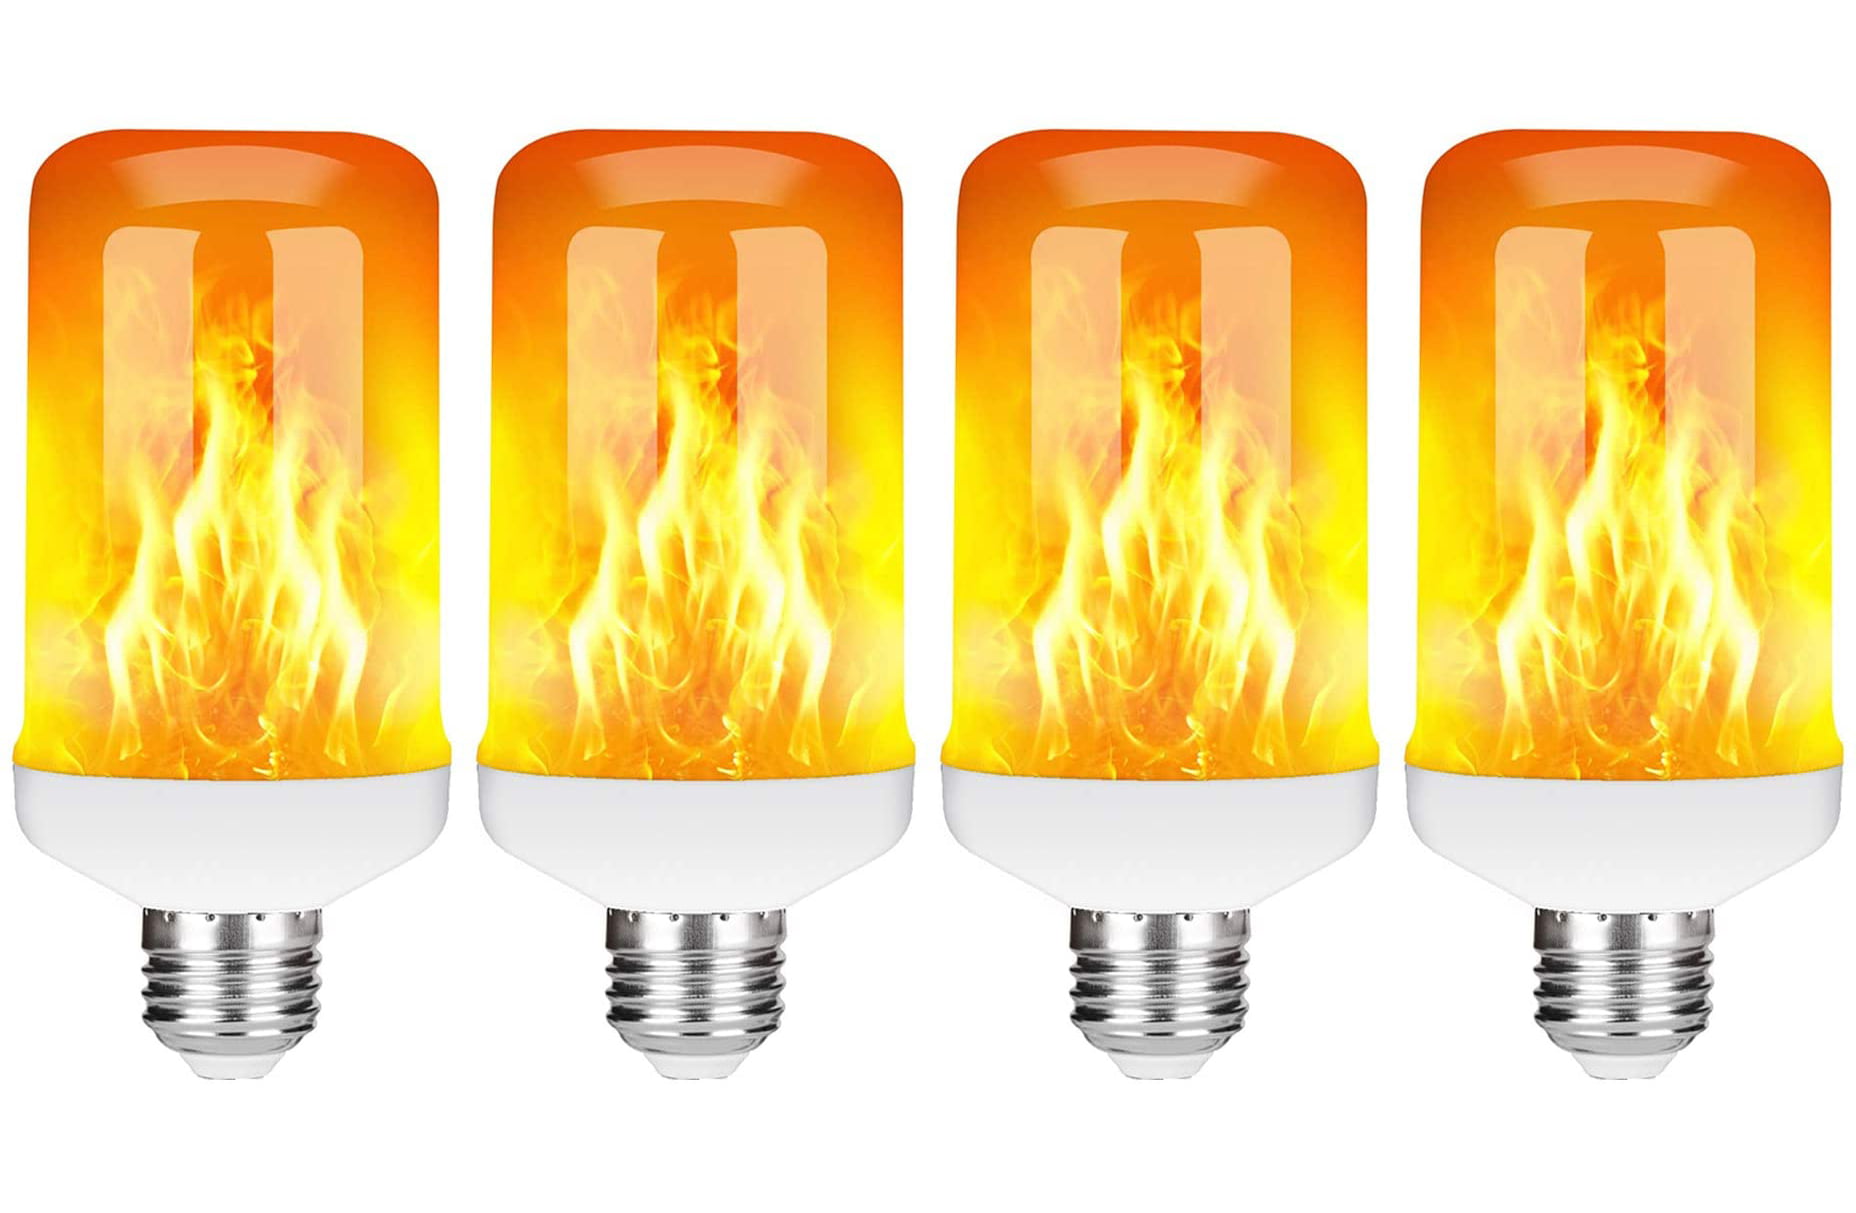 4x E27 LED Flicker Flame Light Bulb Simulated Burning Fire Effect Festival Party 